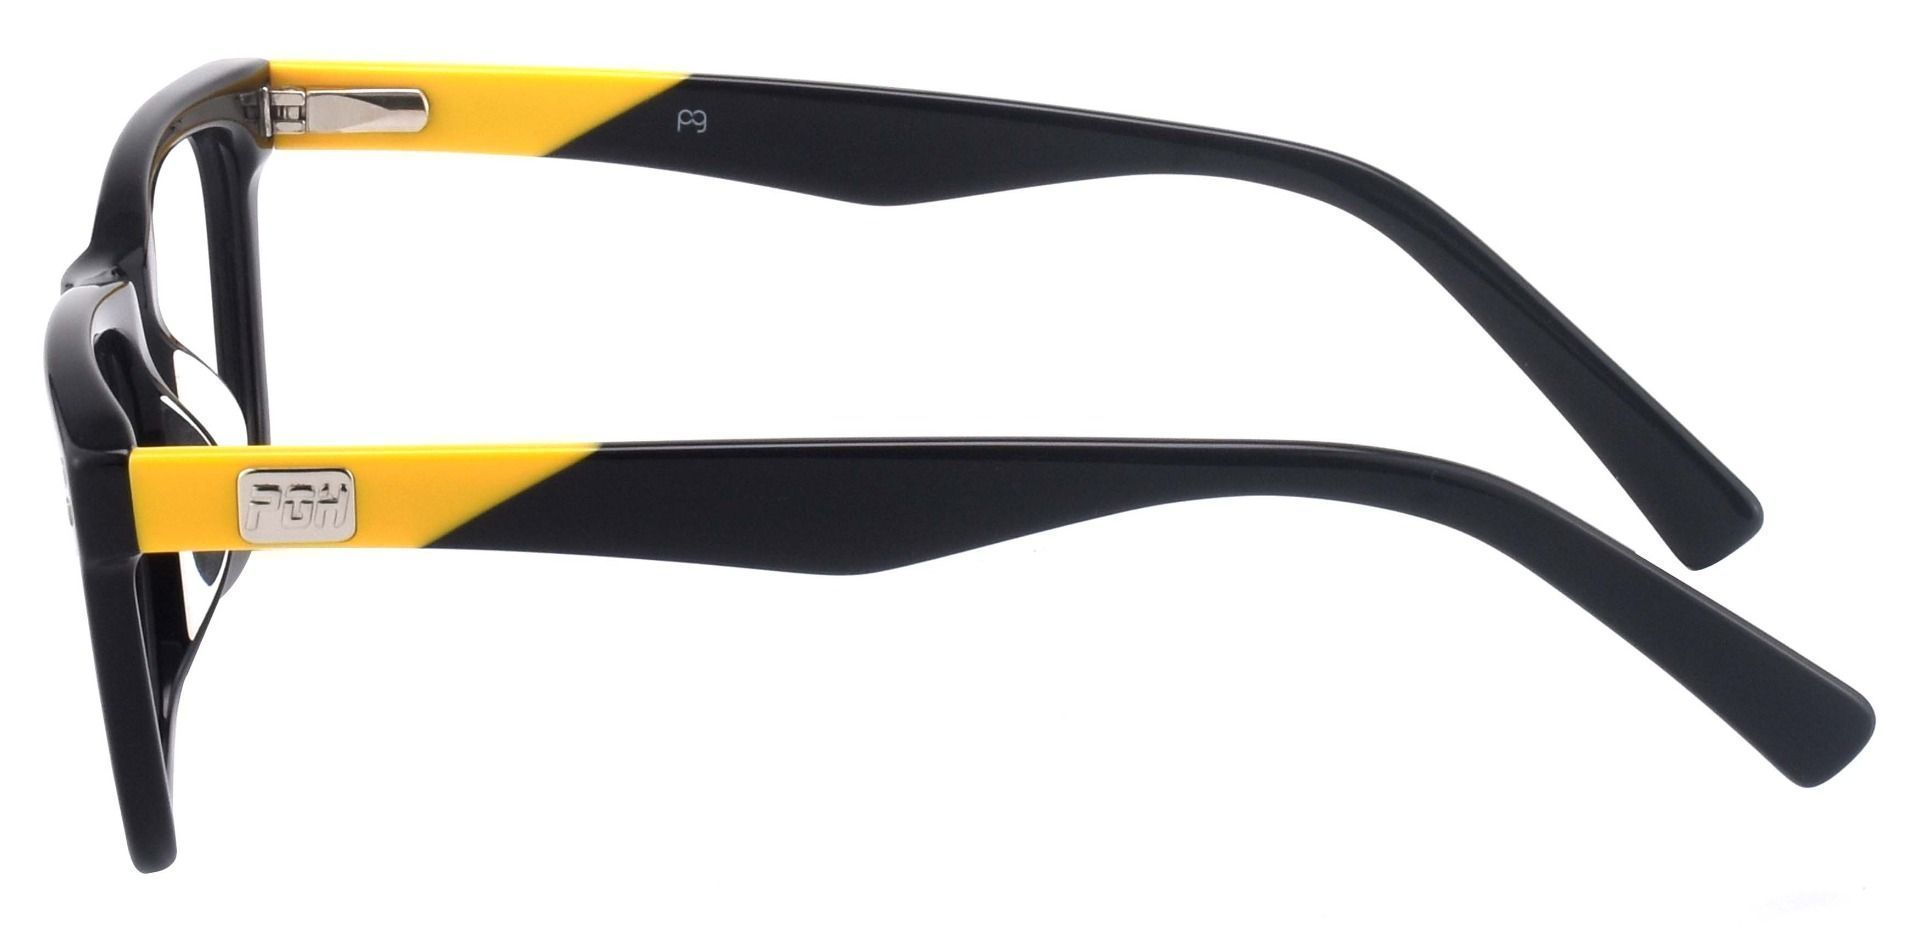 Liberty Rectangle Non-Rx Glasses - The Frame Is Black And Gold